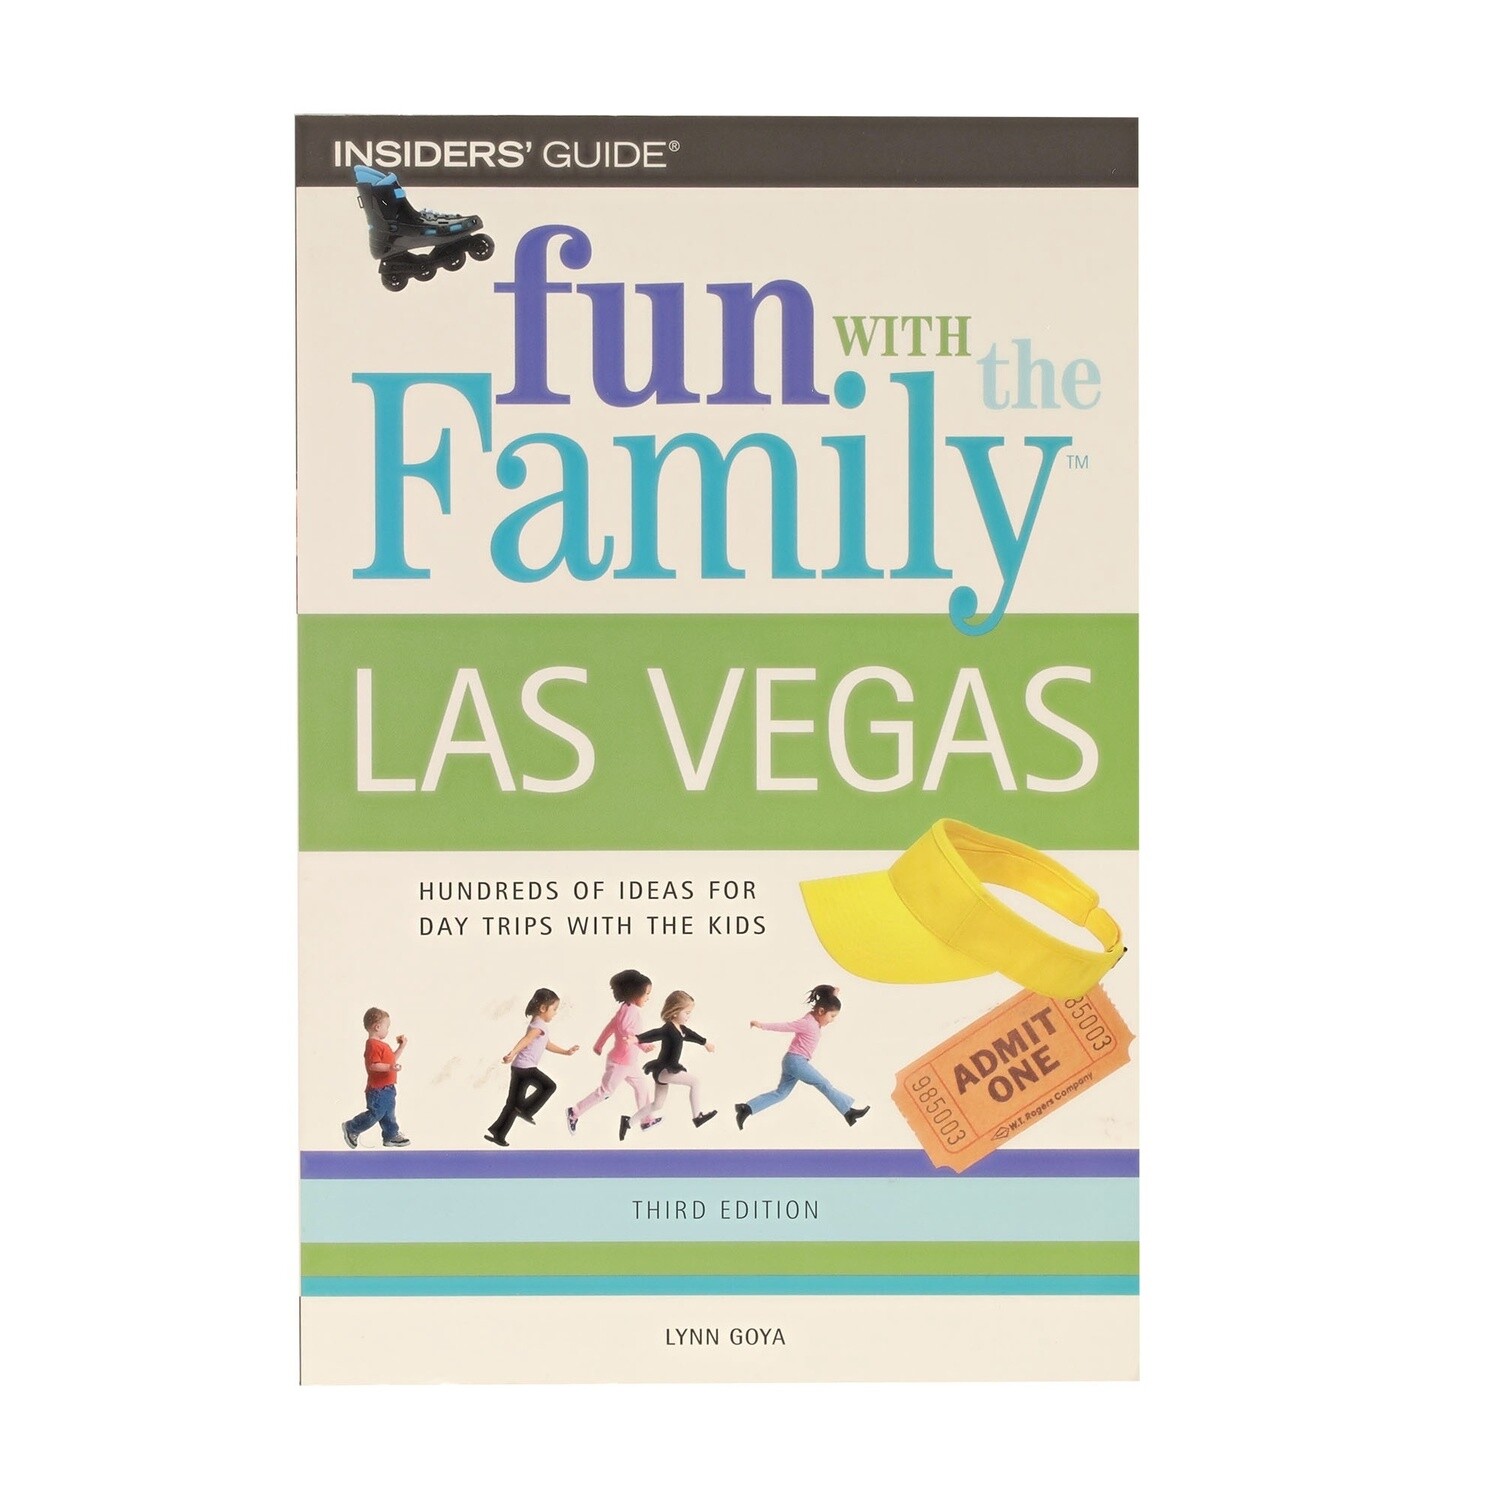 Fun with Family in Las Vegas Hundreds of Ideas for Day Trips with the Kids Third Edition by Lynn Goya